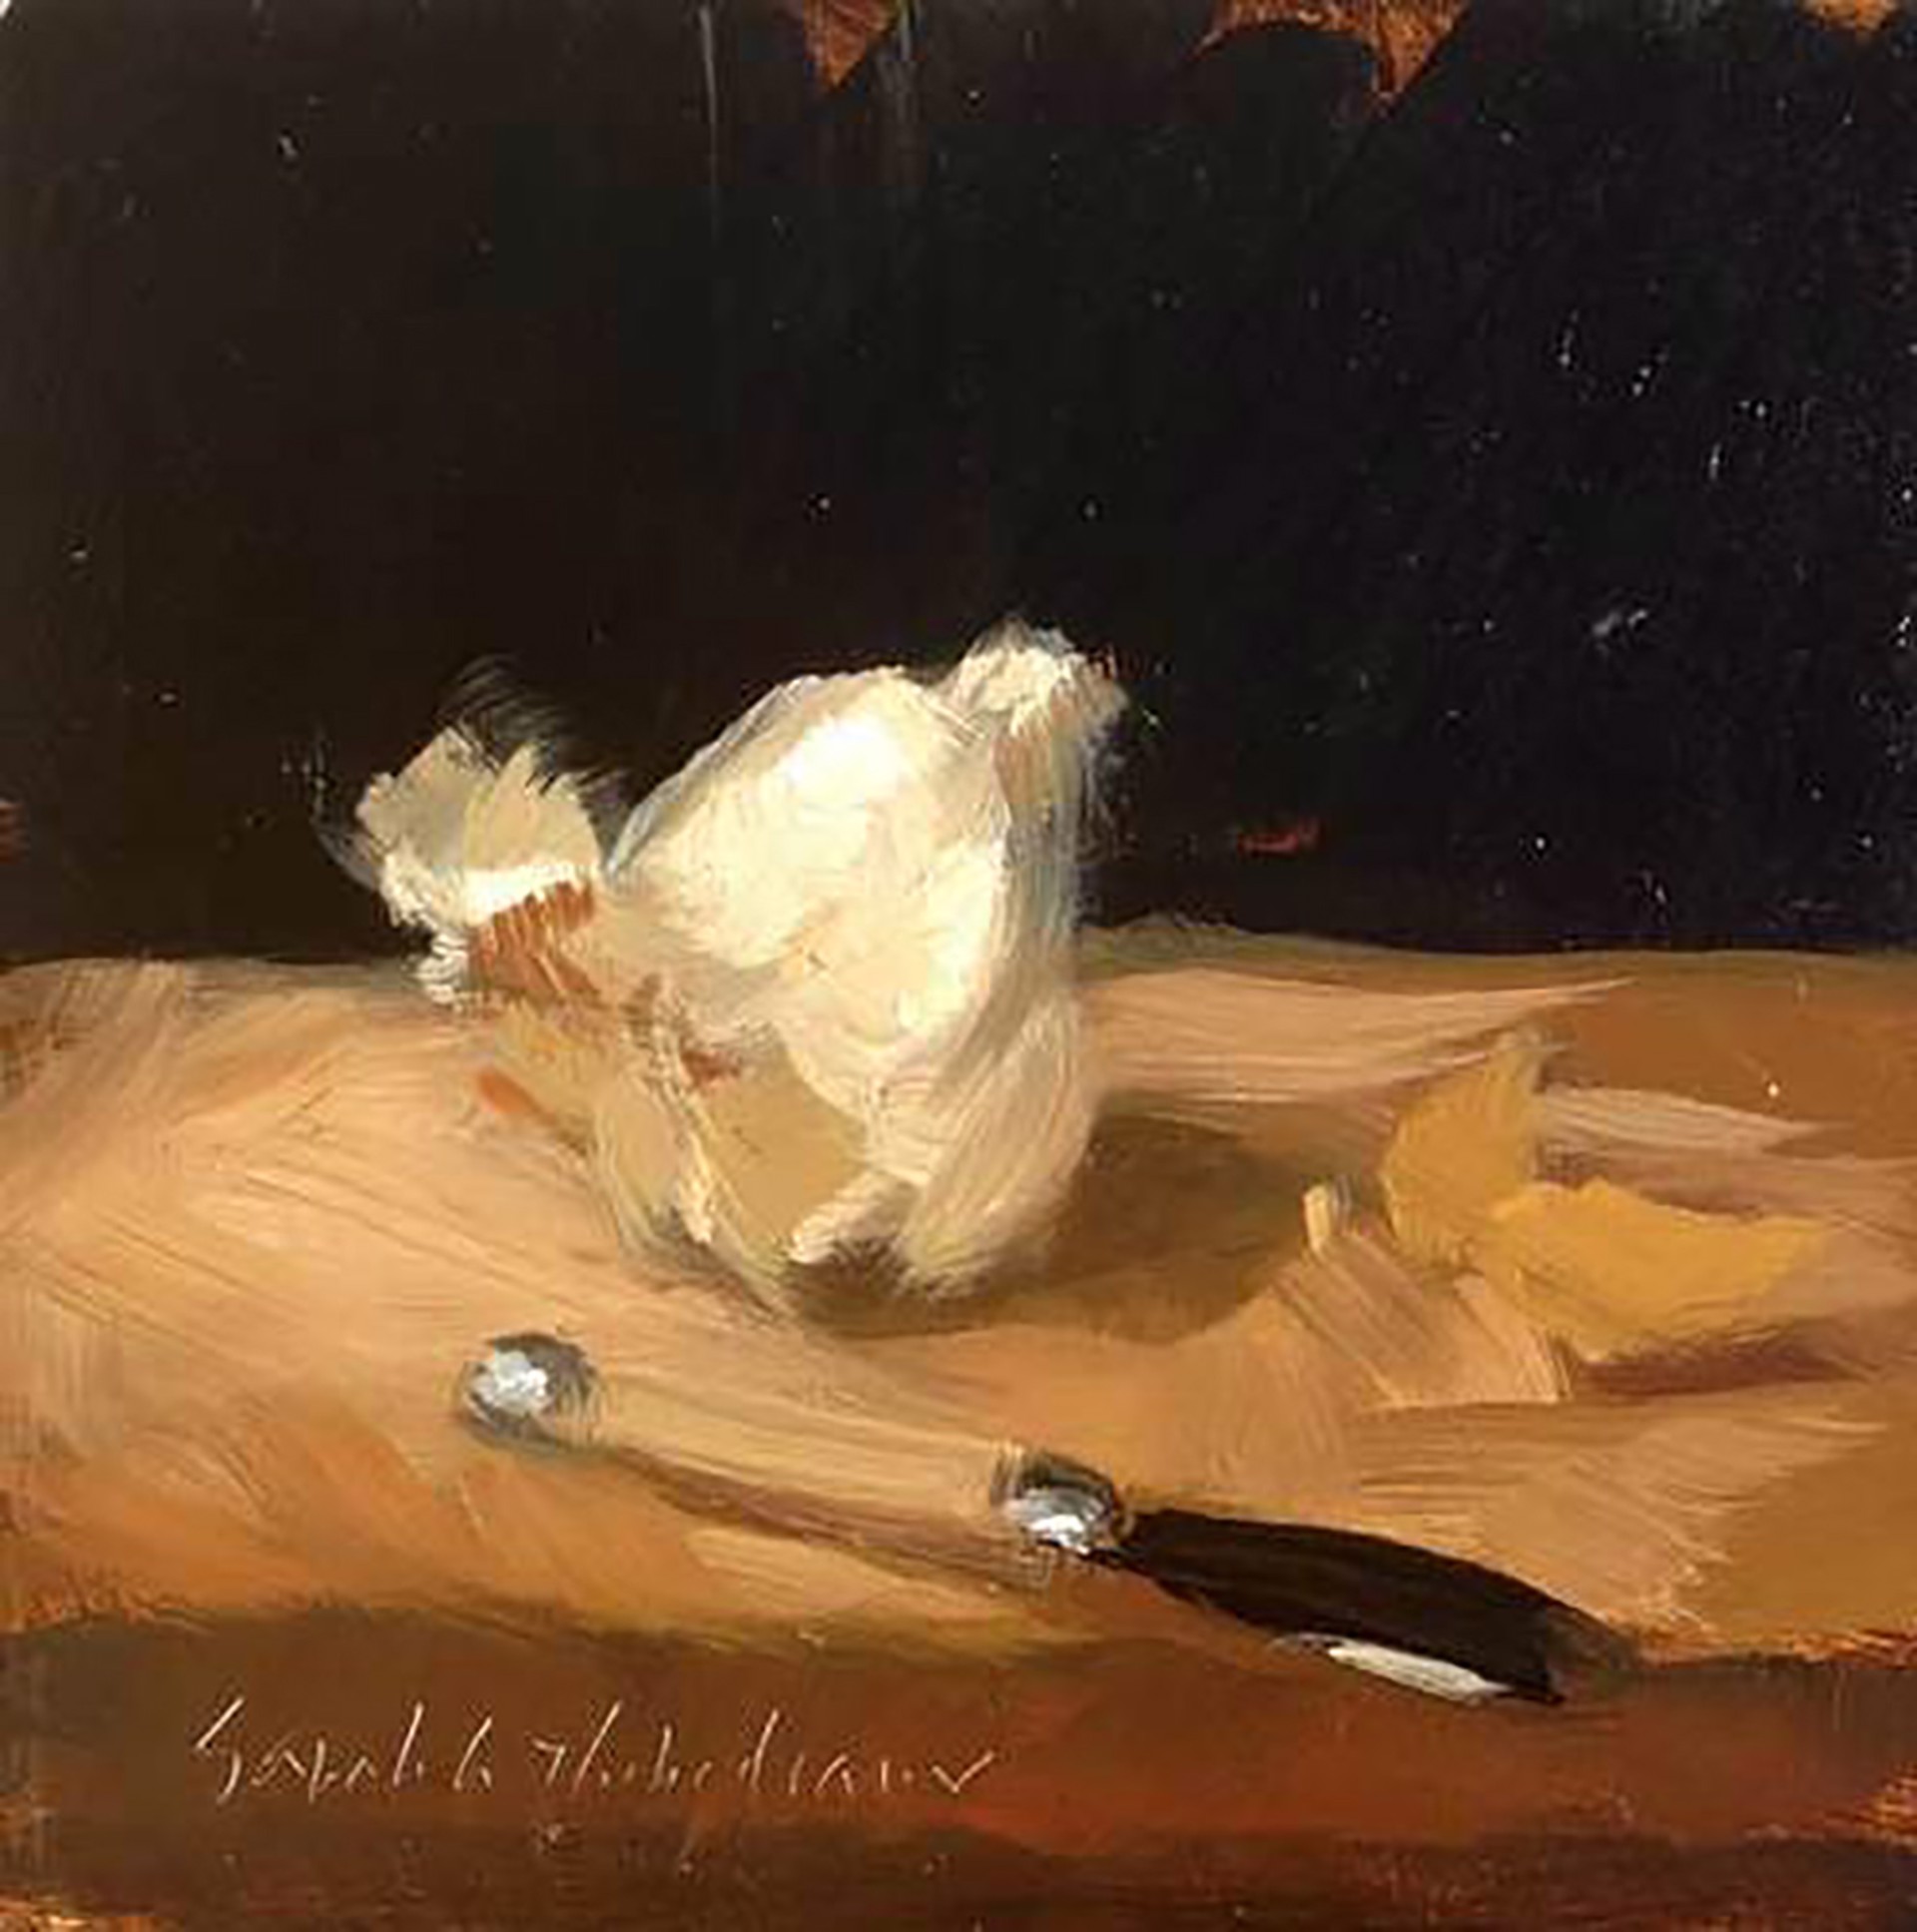 Garlic and Knife by Sarah Griffin Thibodeaux